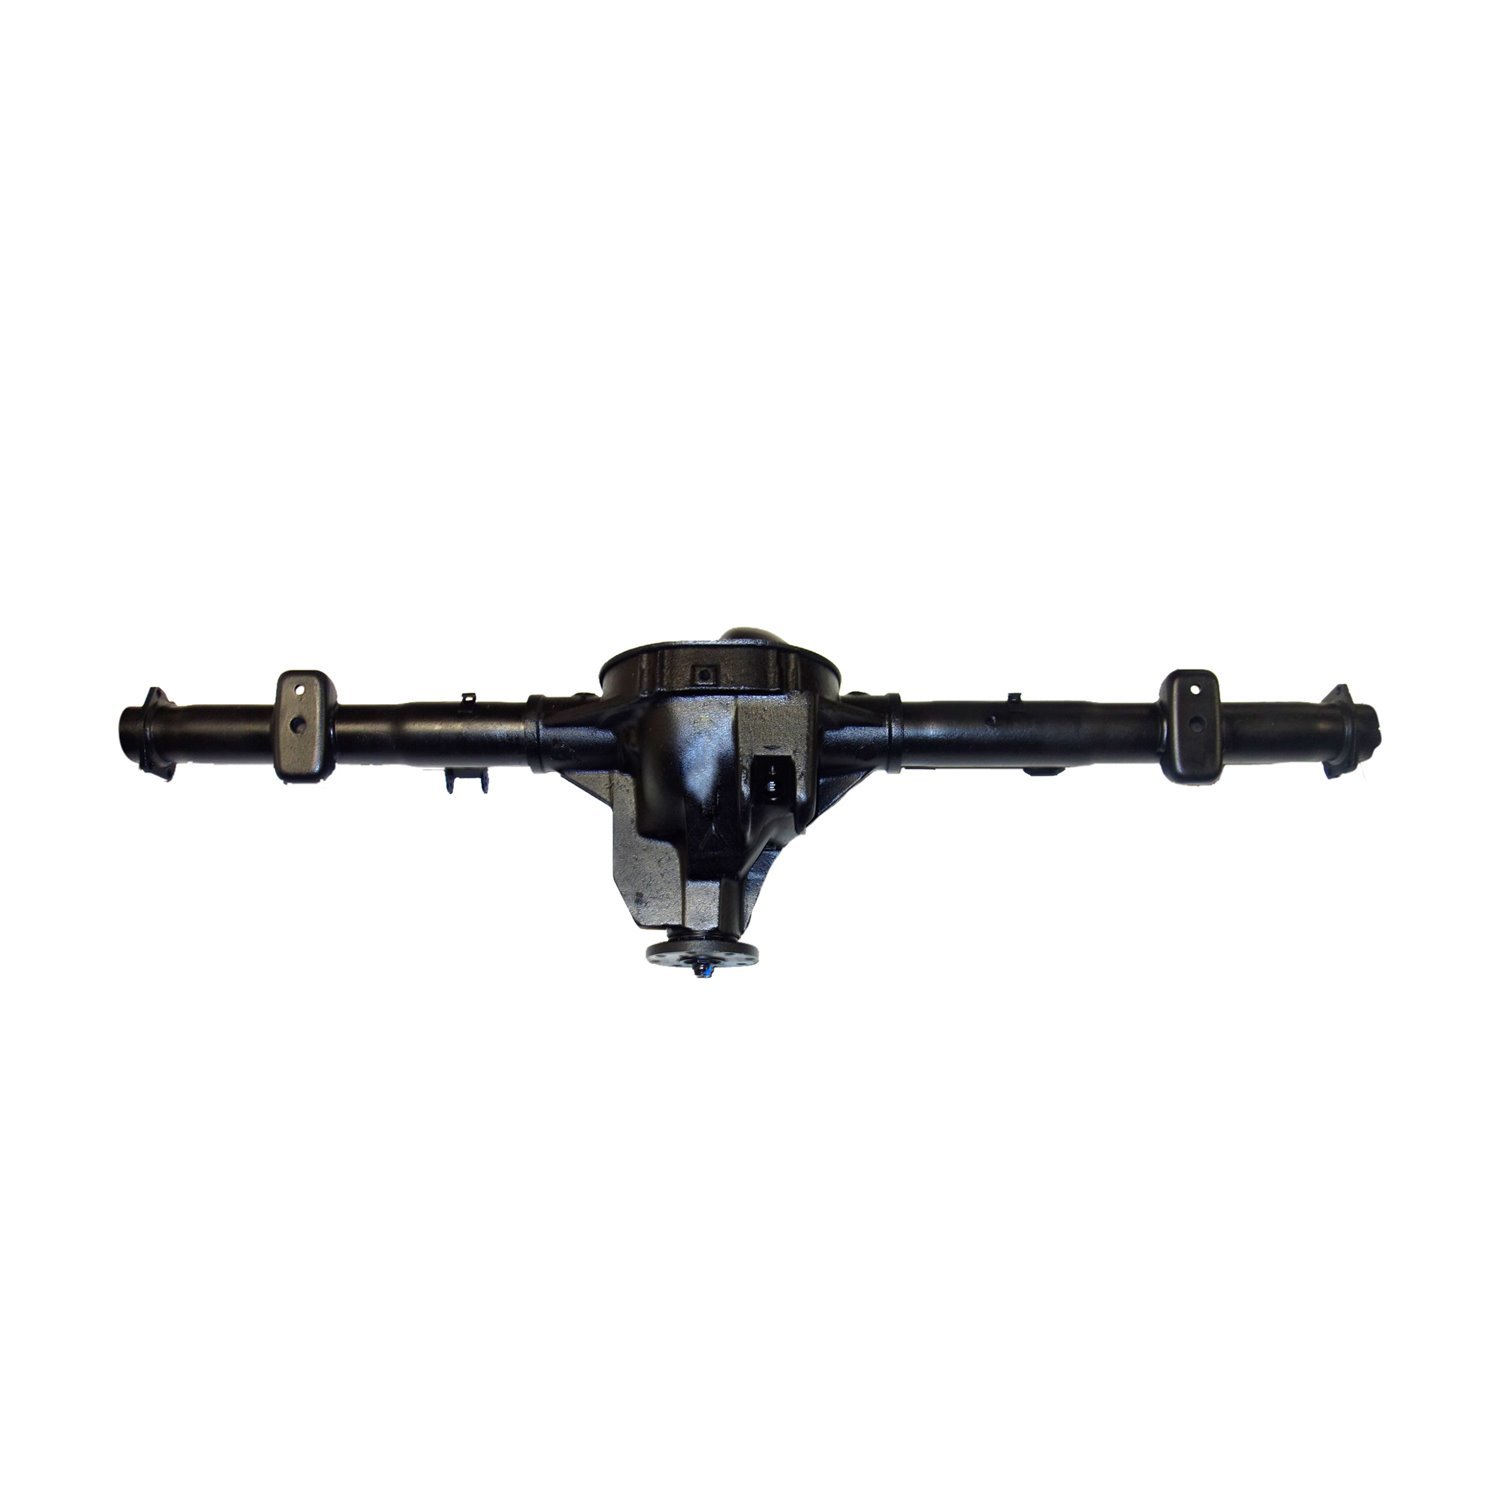 Remanufactured Complete Axle Assembly for 8.8" 99-05 Ranger 3.73 , 10" Drum Brakes